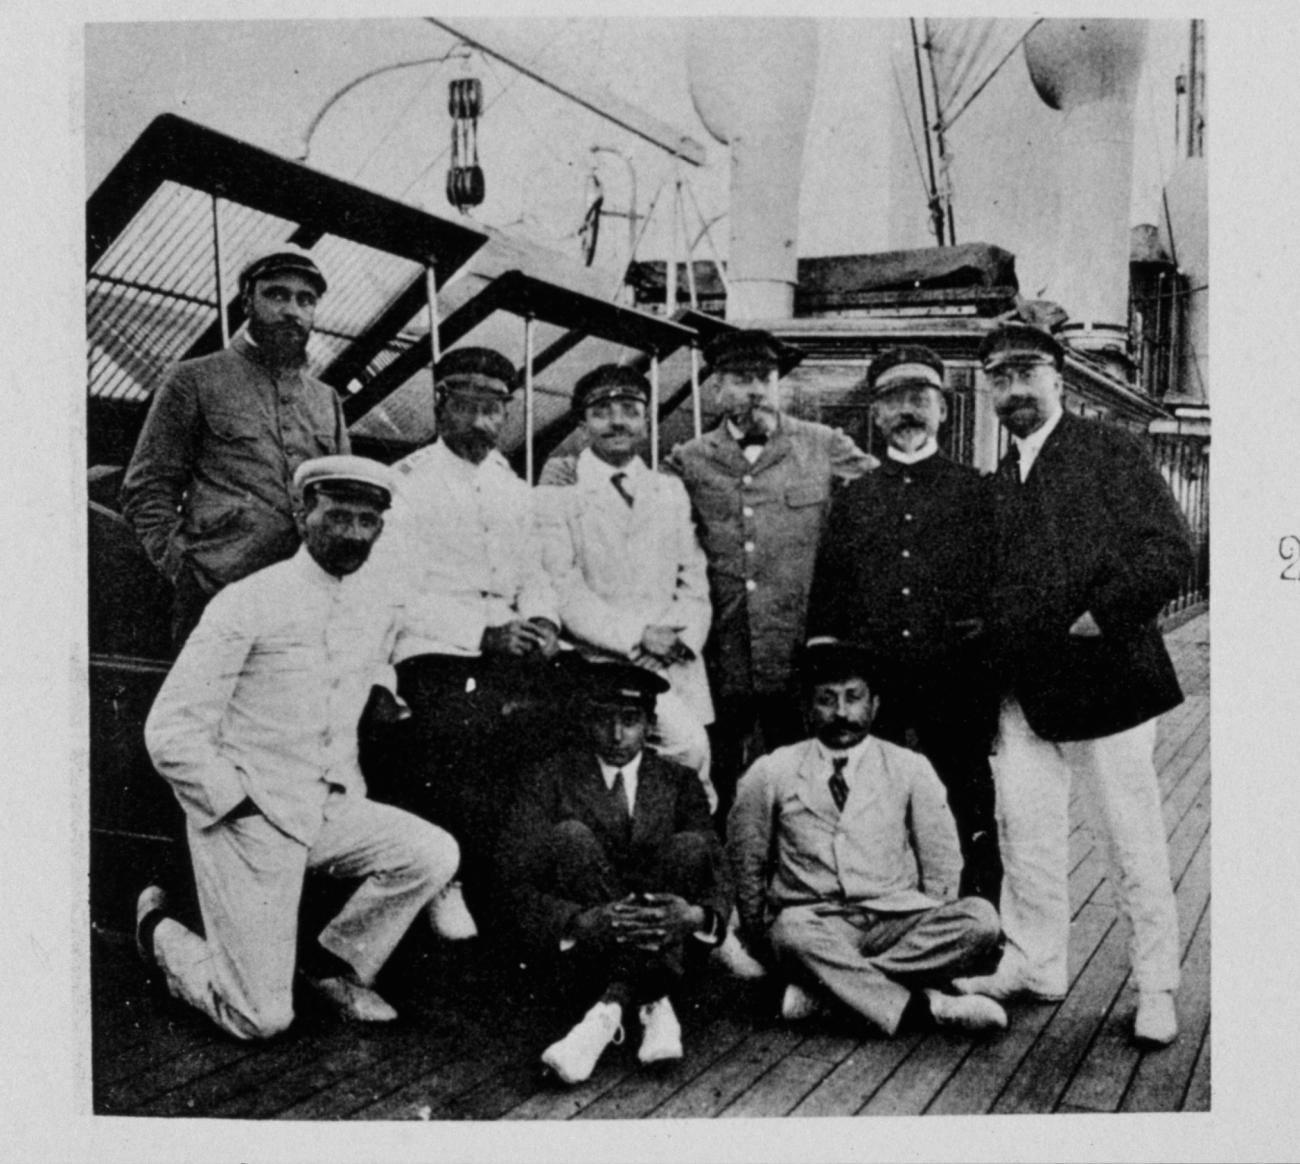 Party on the HIRONDELLE II on August 2, 1914